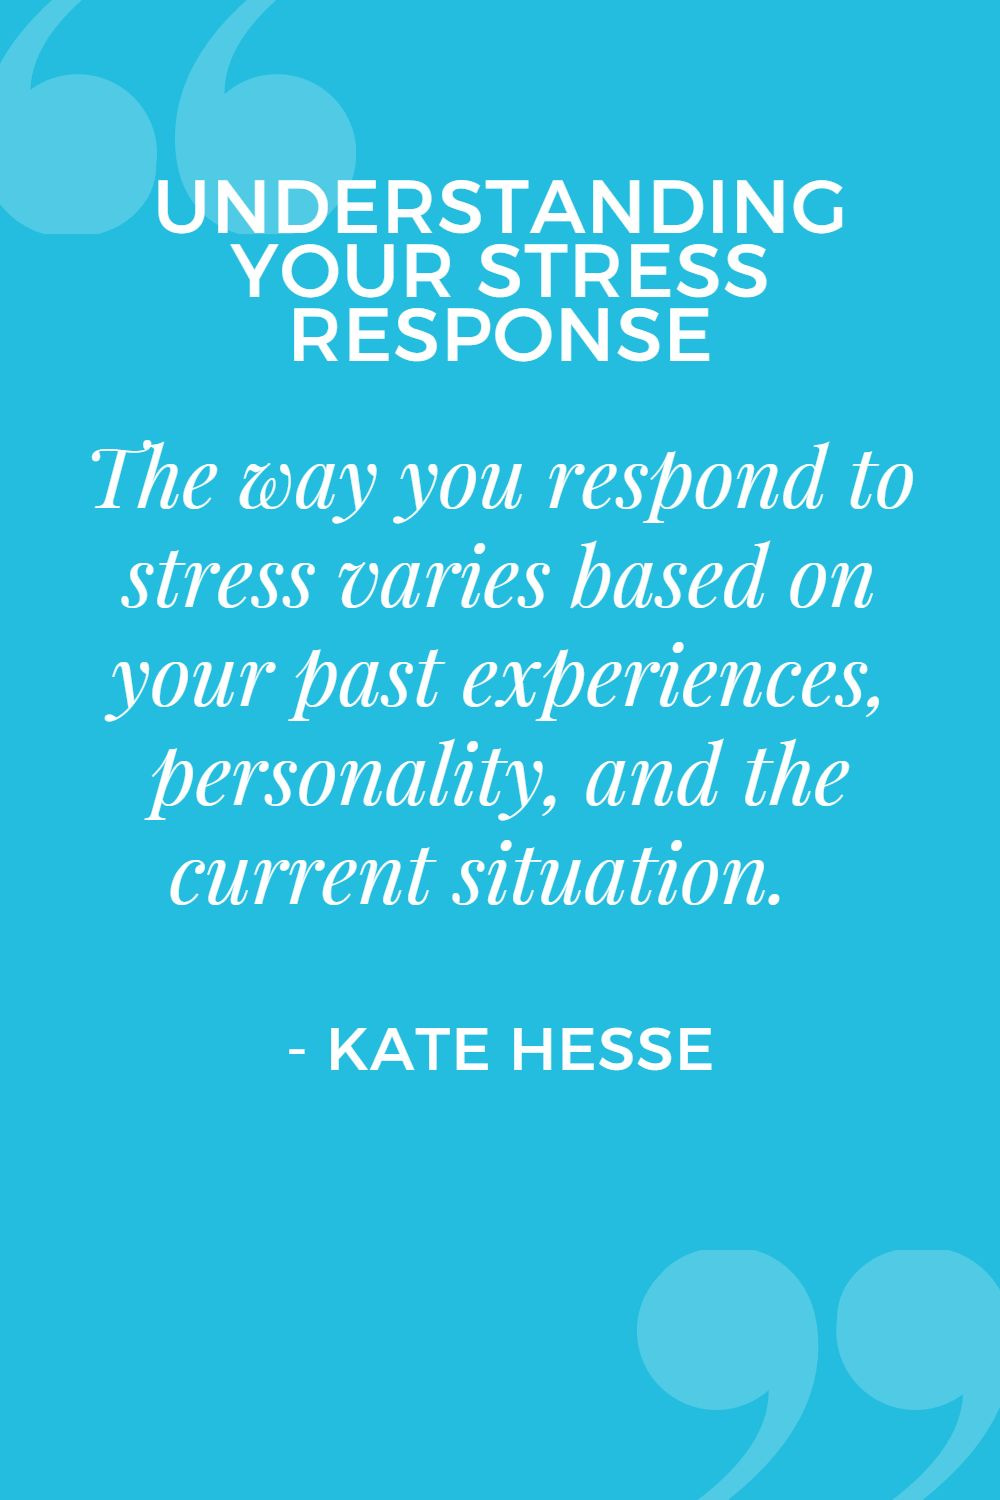 The way you respond to stress varies based on your past experiences, personality, and the current situation.